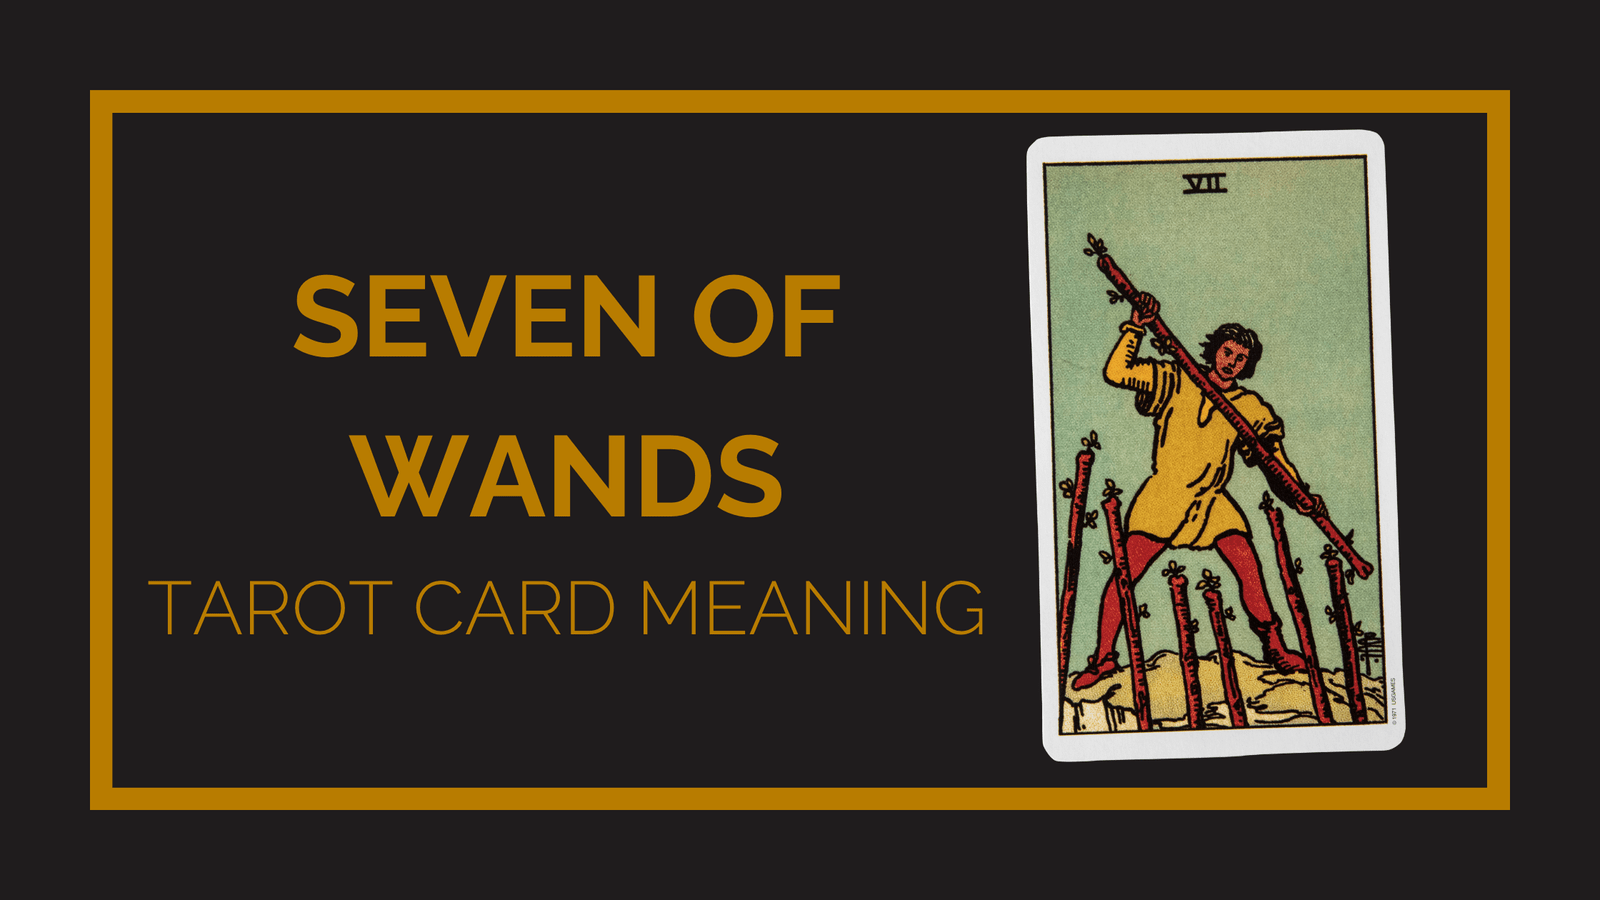 Seven of wands tarot card meaning | tarot with gord